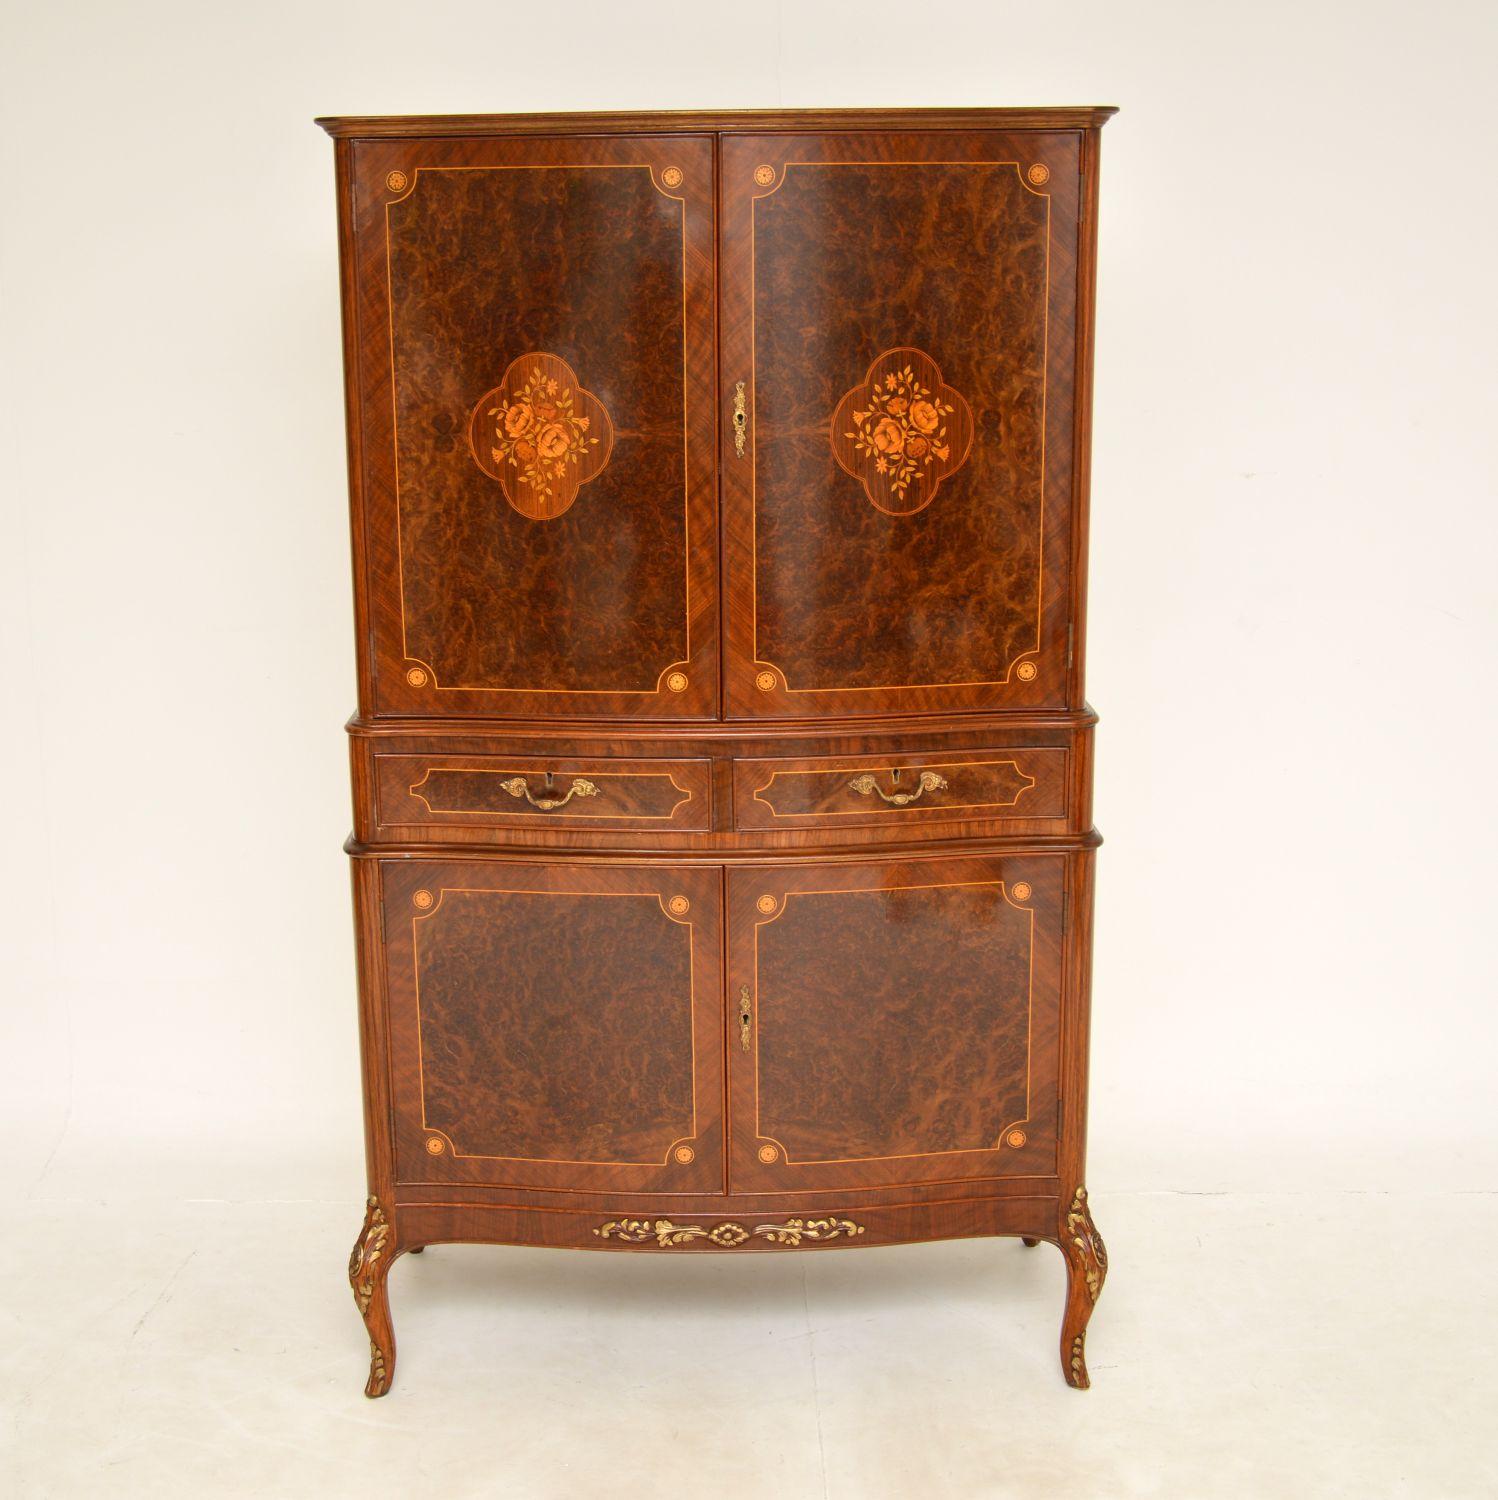 A beautiful and impressive inlaid walnut drinks cabinet in the antique French style, dating from around the 1950’s period.
The quality is amazing, this is extremely well made with many fine features. It is made from a combination of burr walnut,